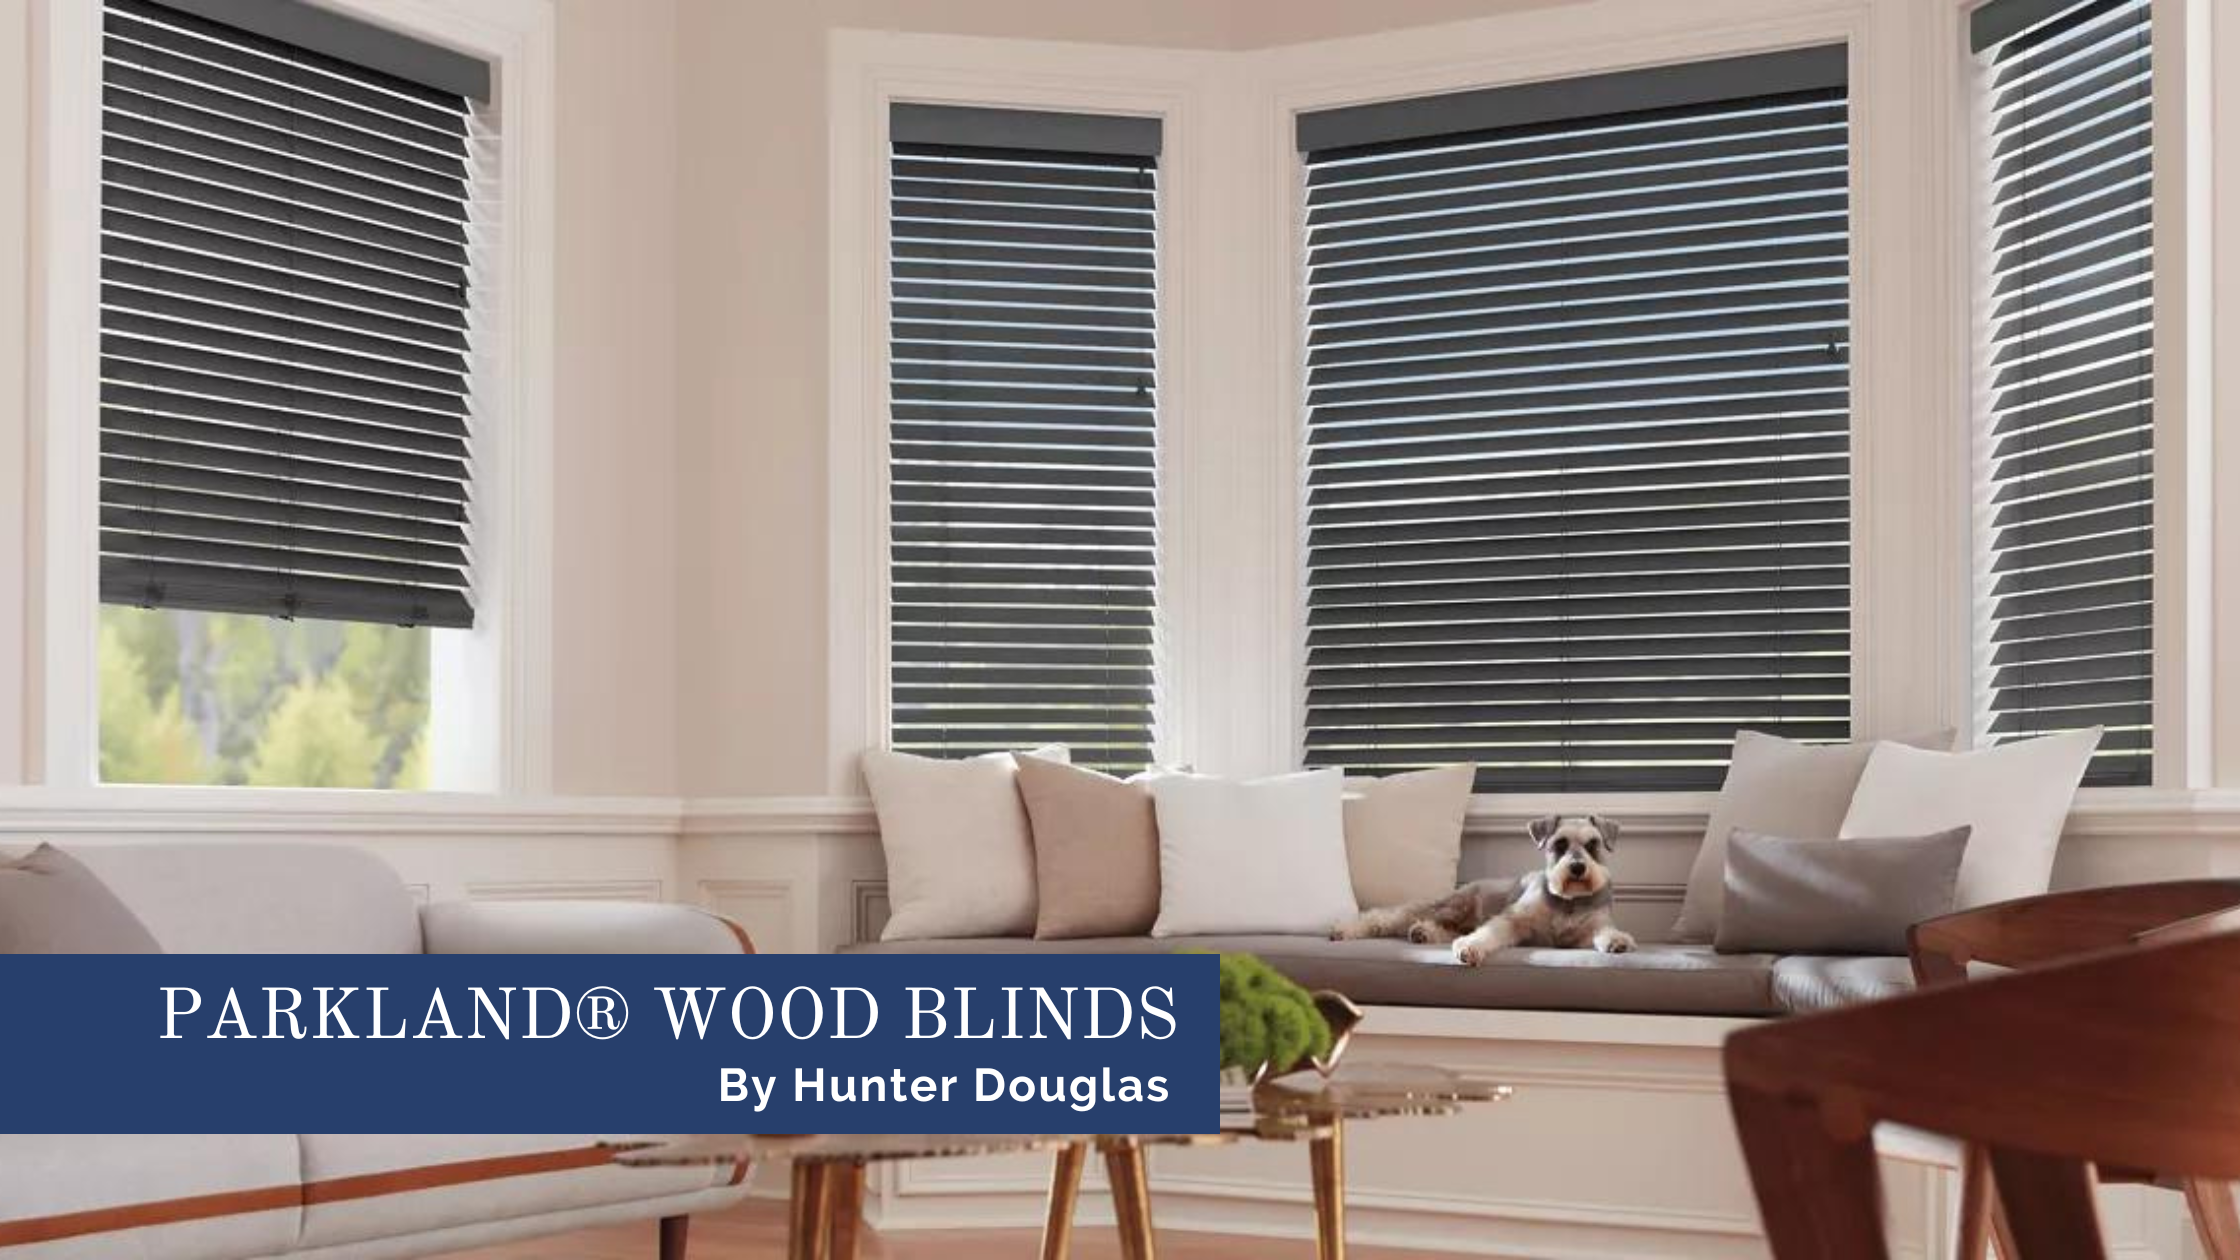 Hunter Douglas Parkland® wood blinds for living rooms, wooden blinds for windows near Chicago, Illinois (IL) and Midwest